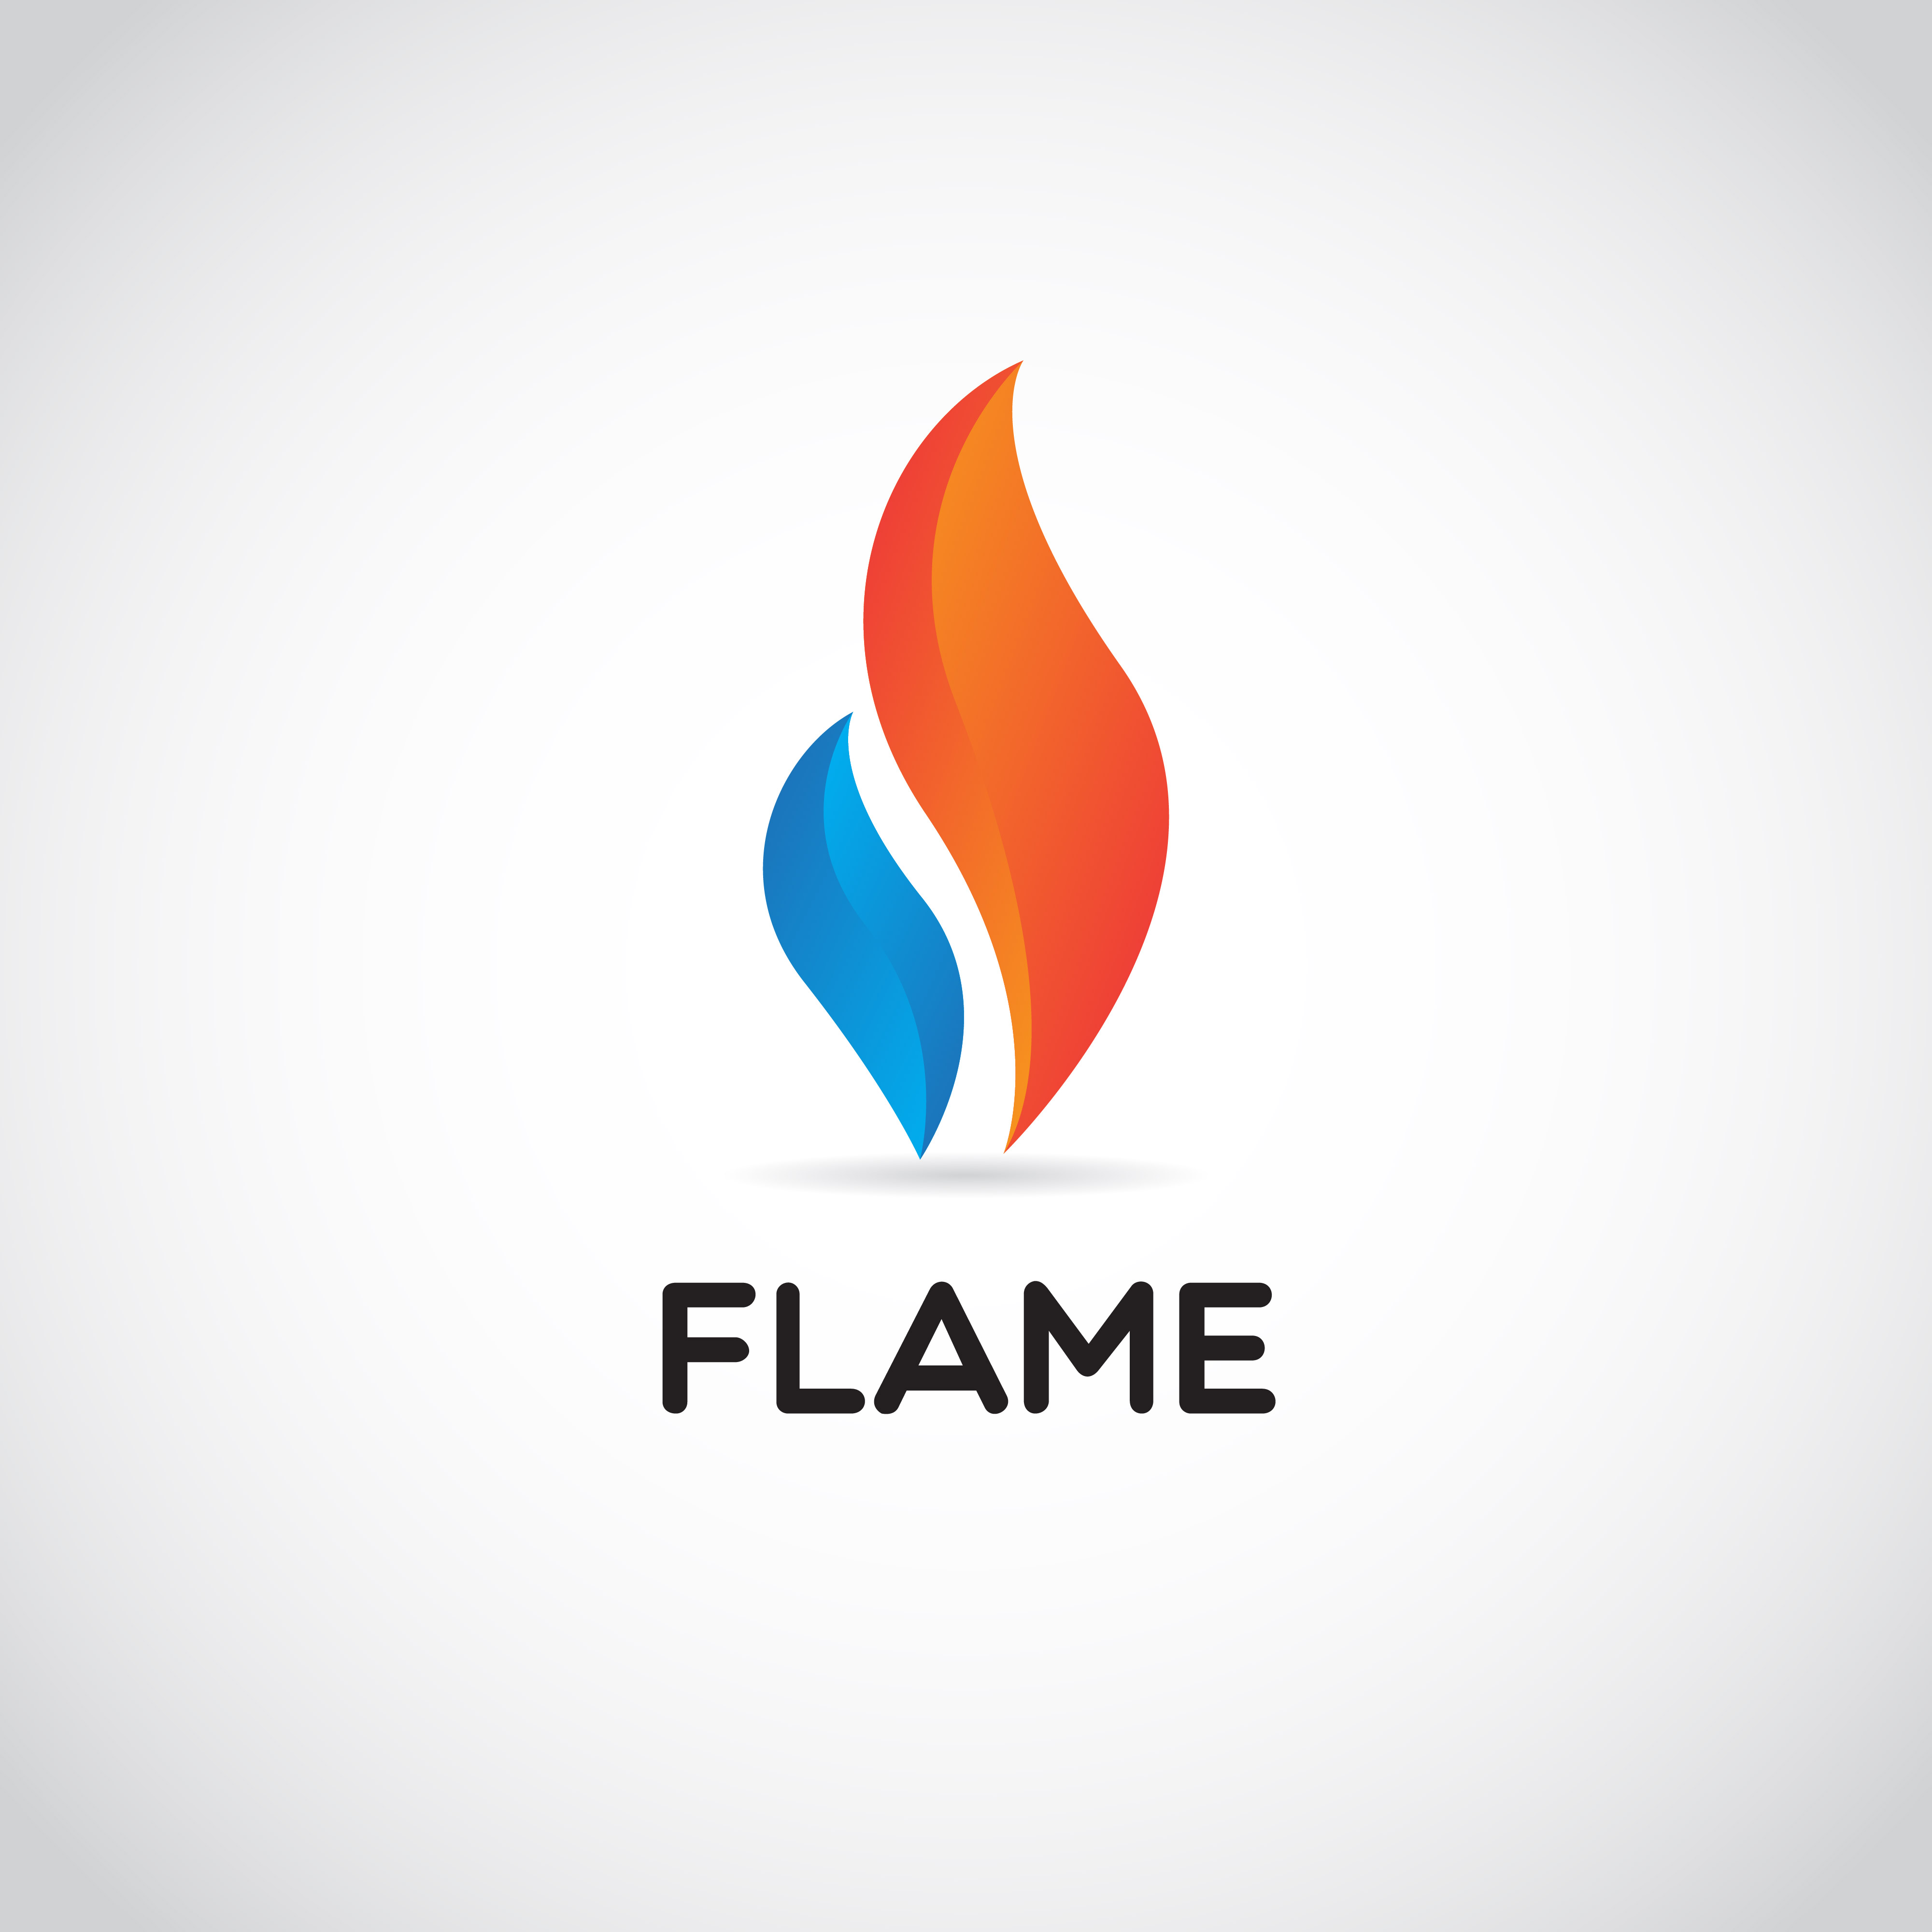 Clean Red And Blue Flame Logo Download Free Vectors Clipart